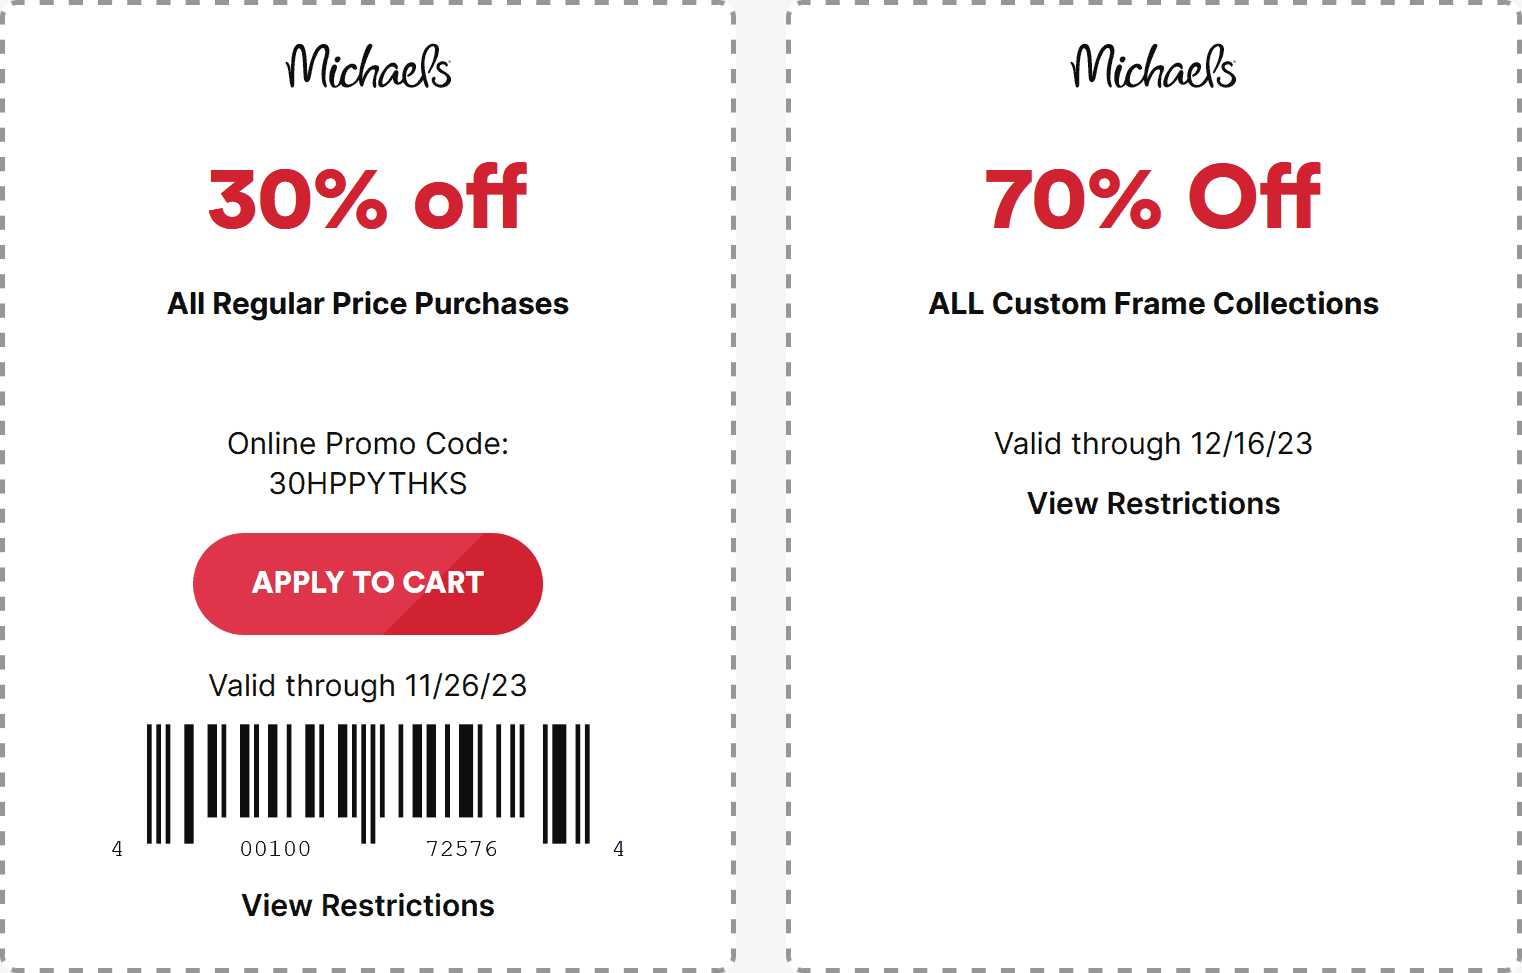 30% off today at Michaels, or online via promo code 30HPPYTHKS #michaels